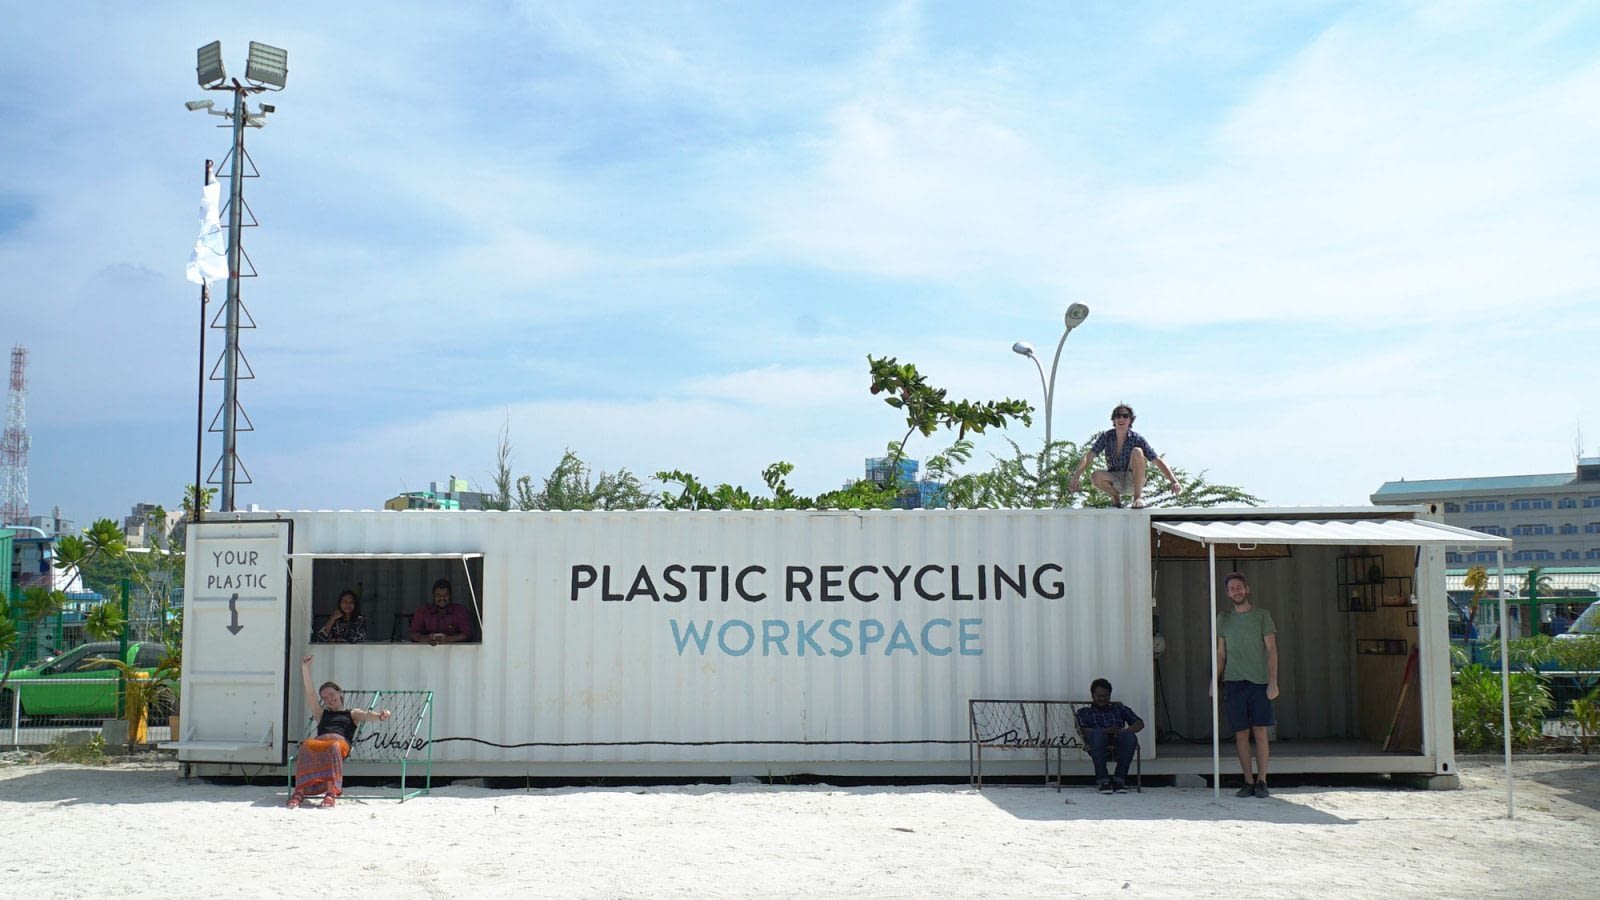 Image: Precious Plastics team members with the plastic recycling workspace in the Maldives